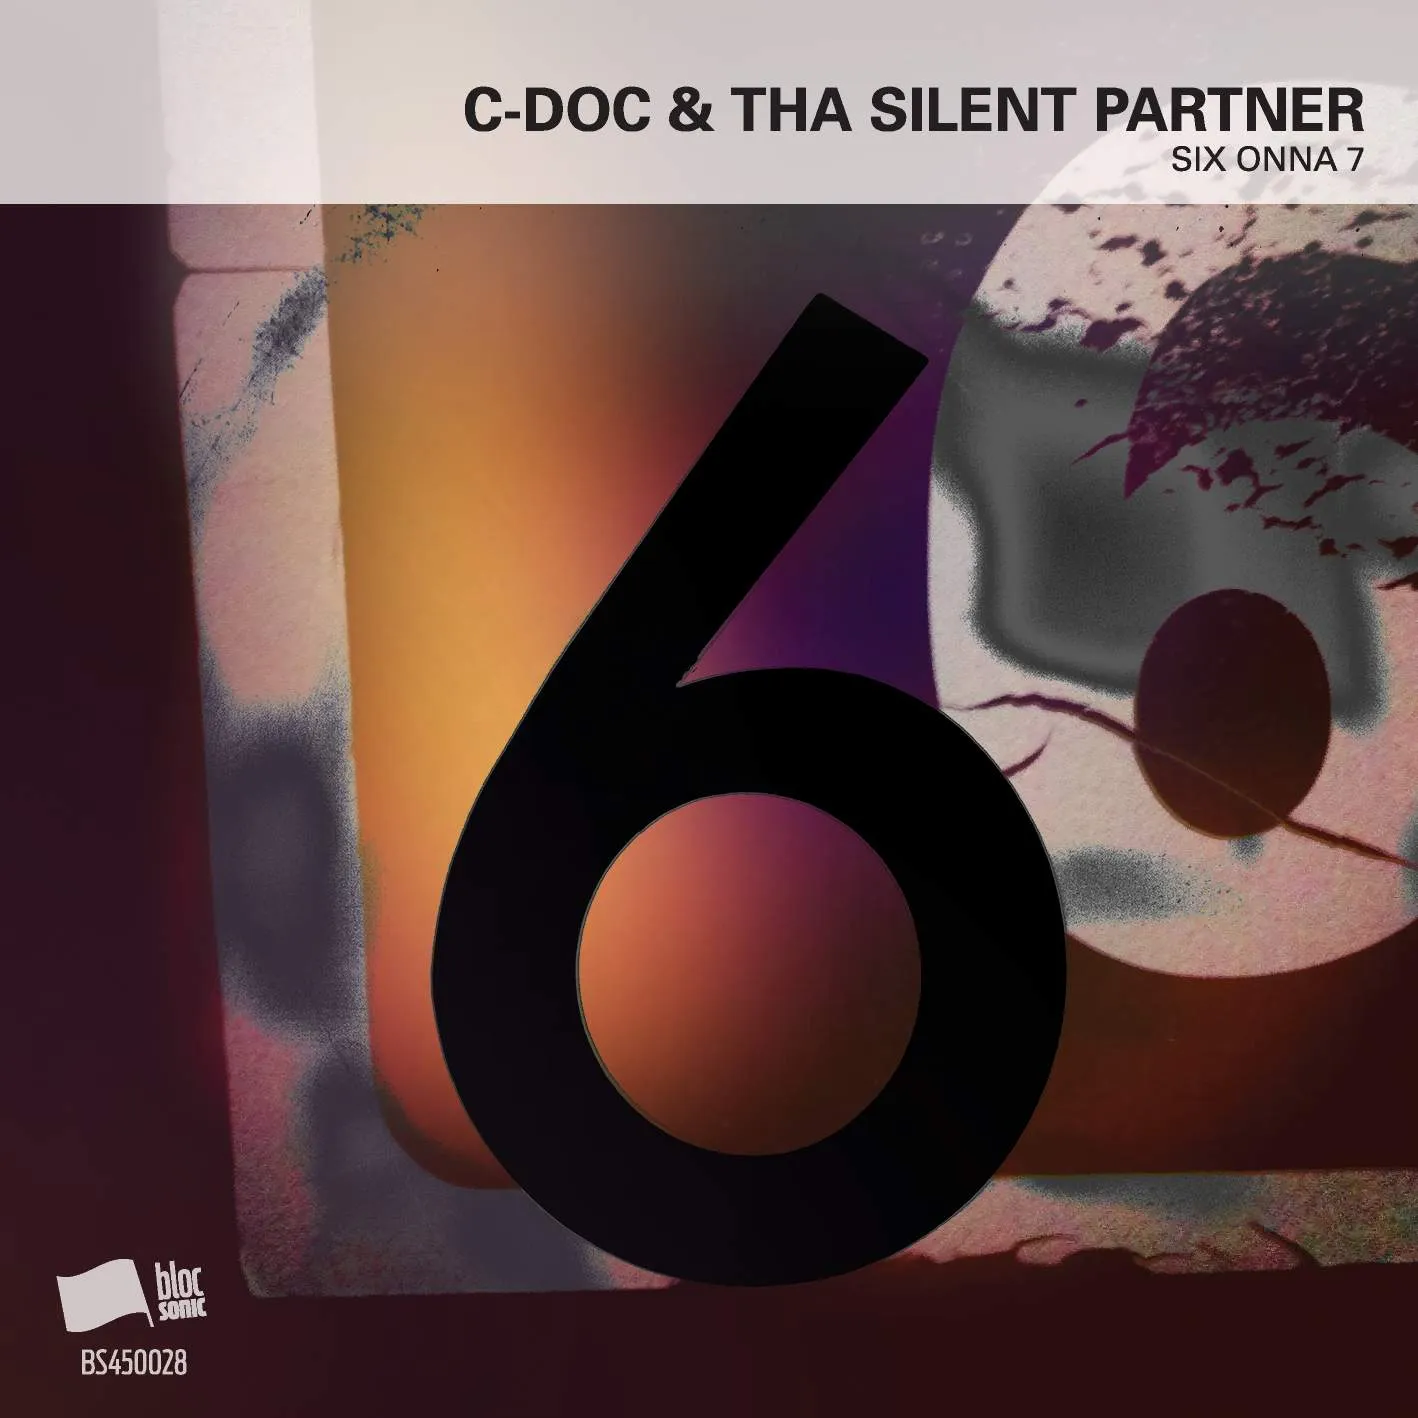 Album cover for “SIX ONNA 7” by C-Doc &amp; Tha Silent Partner